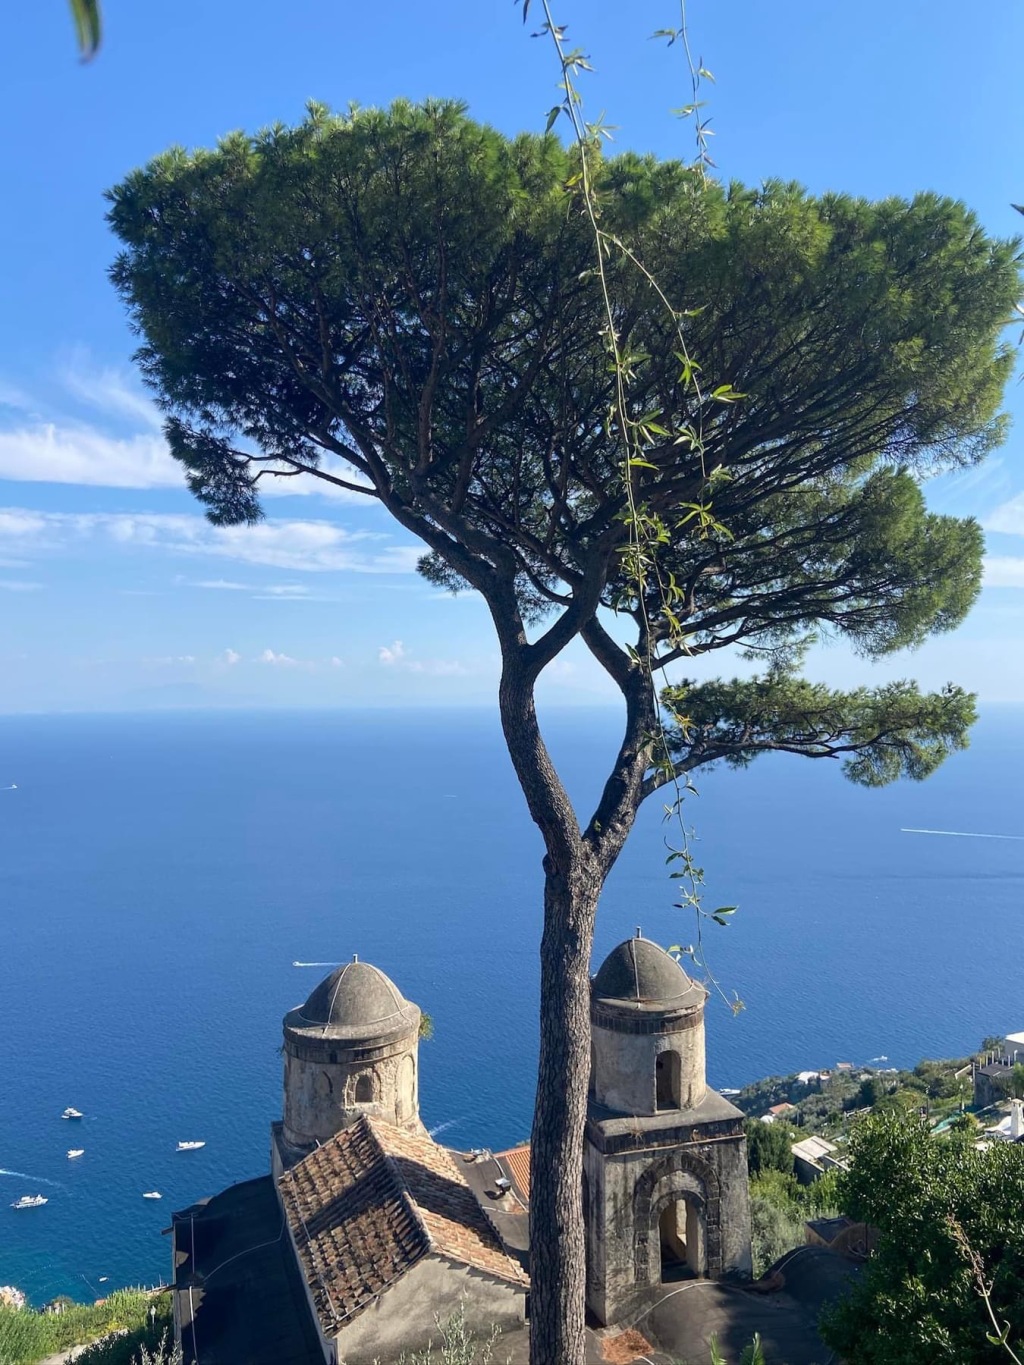 Amalfi: go with an open mind, a healthy bank balance and comfy walking shoes